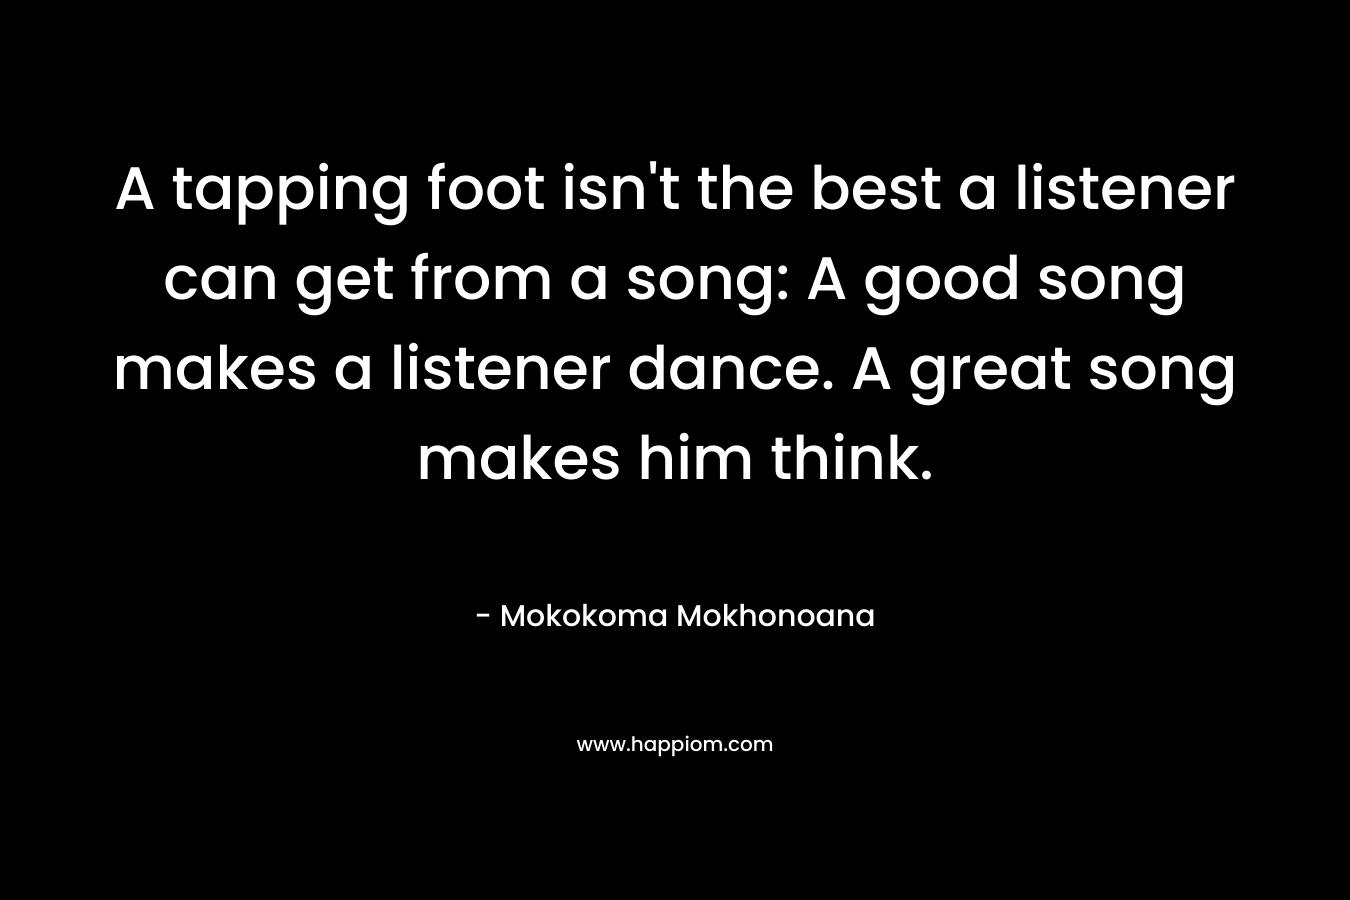 A tapping foot isn't the best a listener can get from a song: A good song makes a listener dance. A great song makes him think.